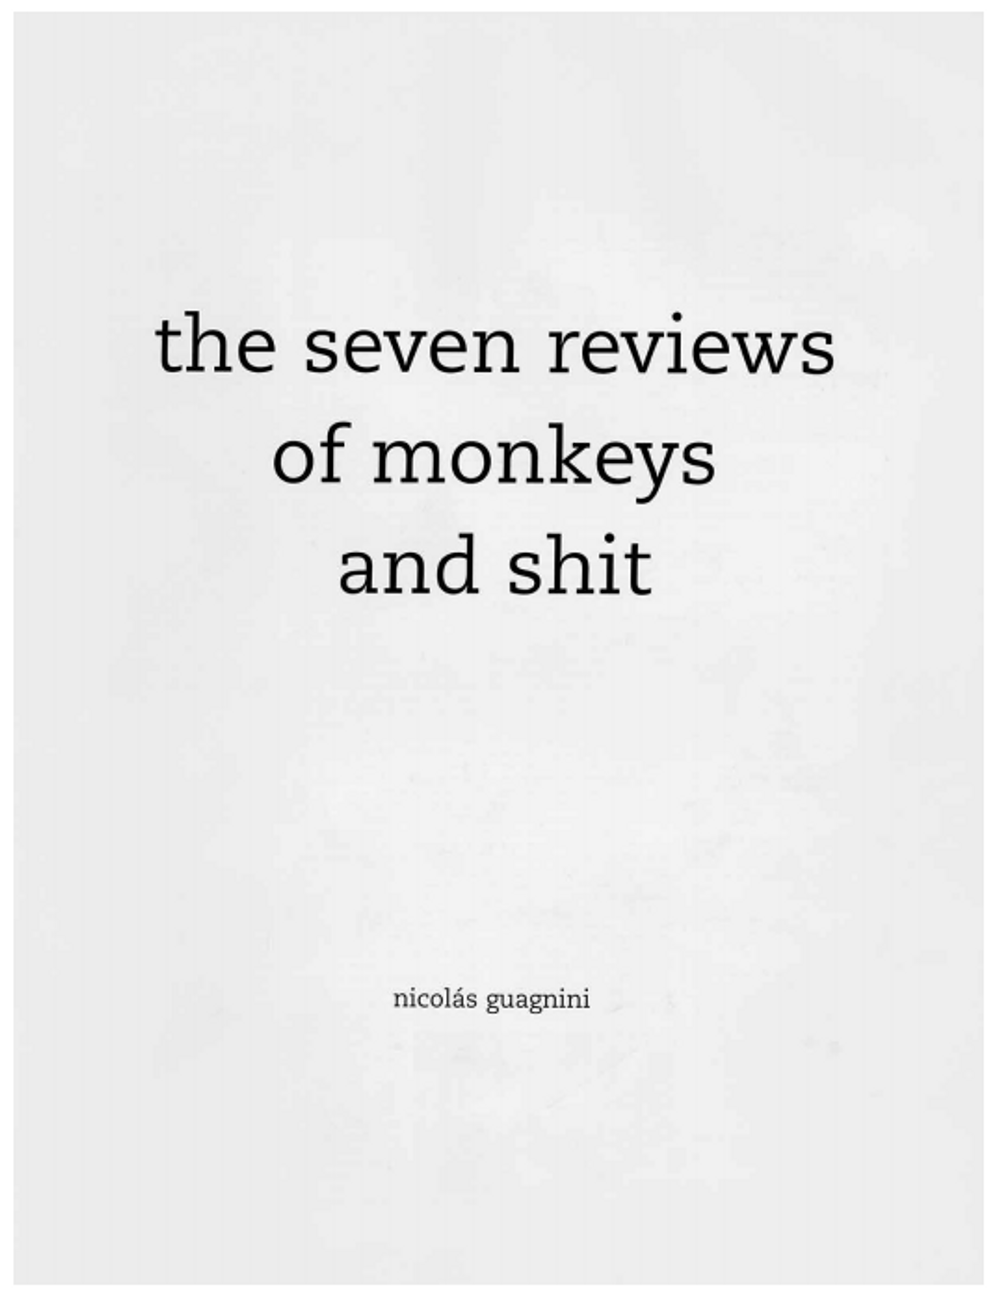 Book cover on plain gray background with title of The Seven Reviews of Monkeys and Shit